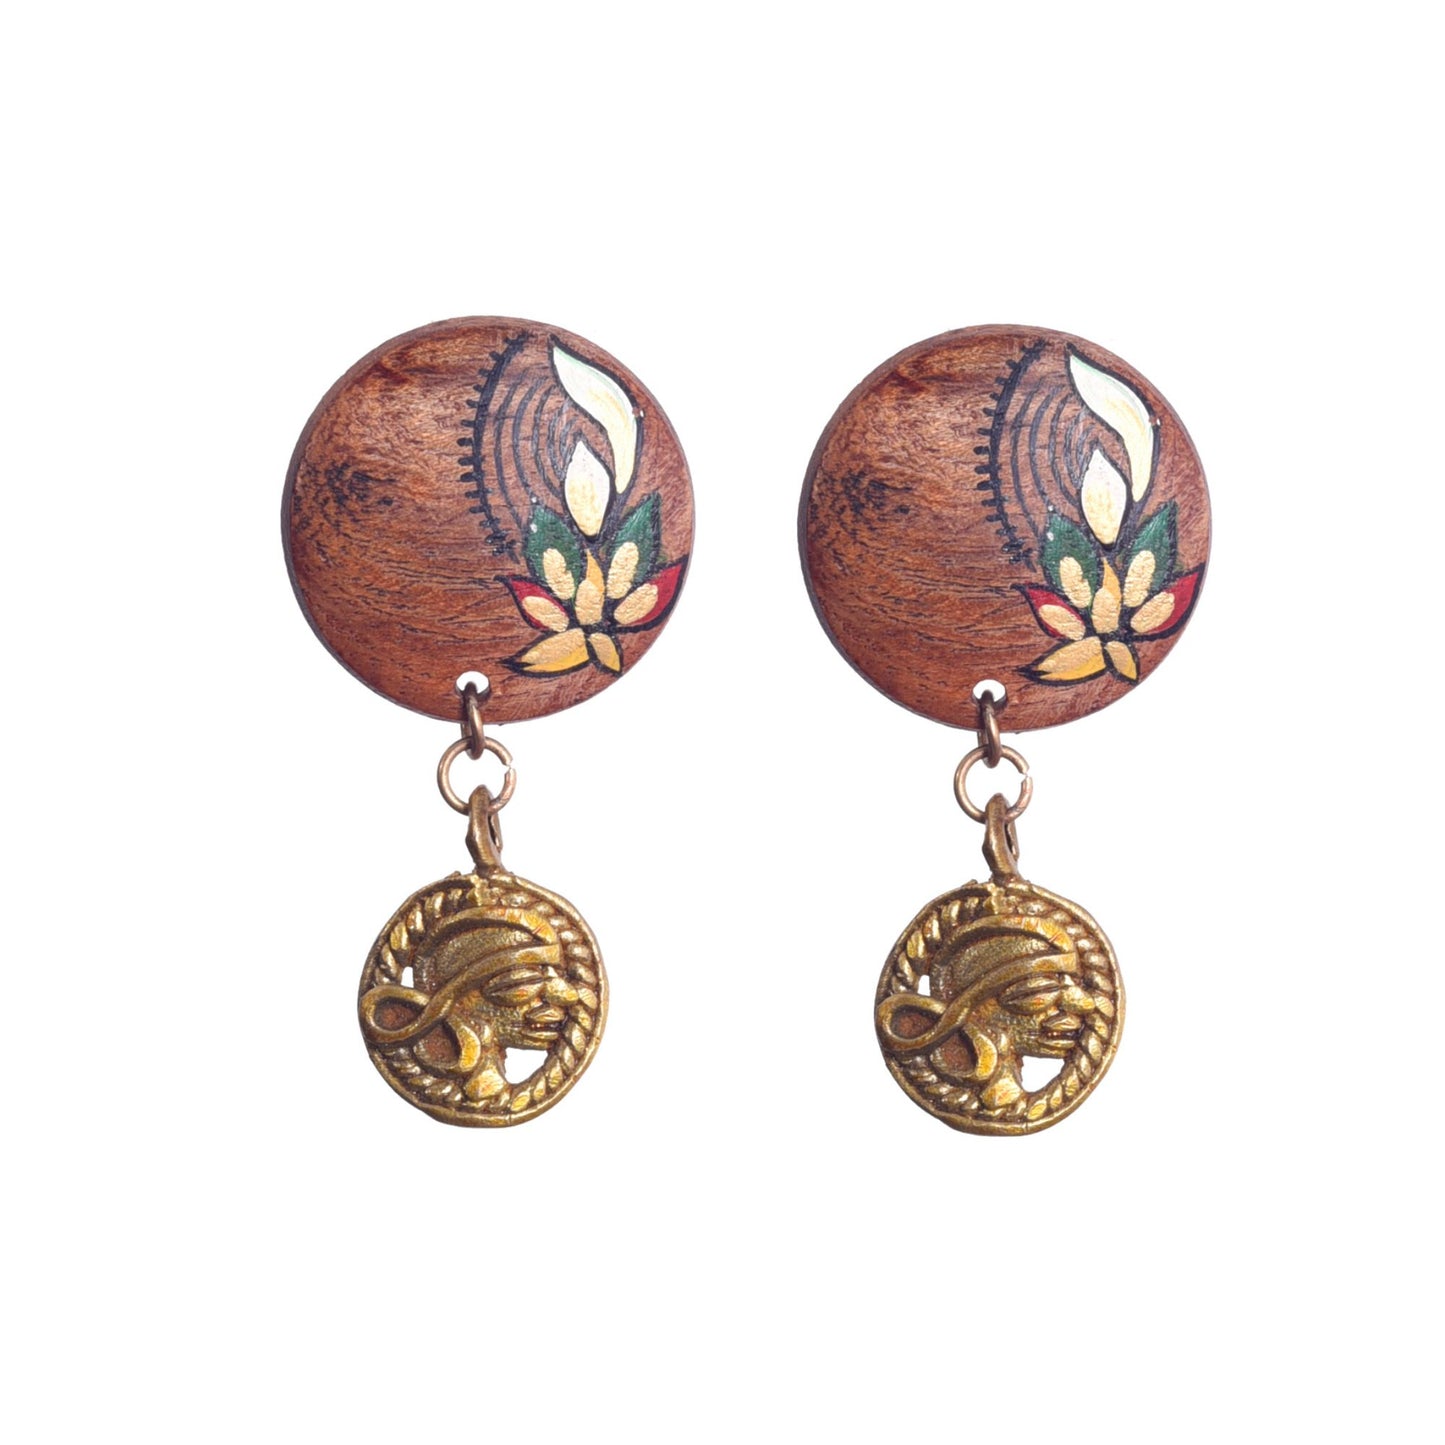 Floral Fusion: Handcrafted Wooden Earrings